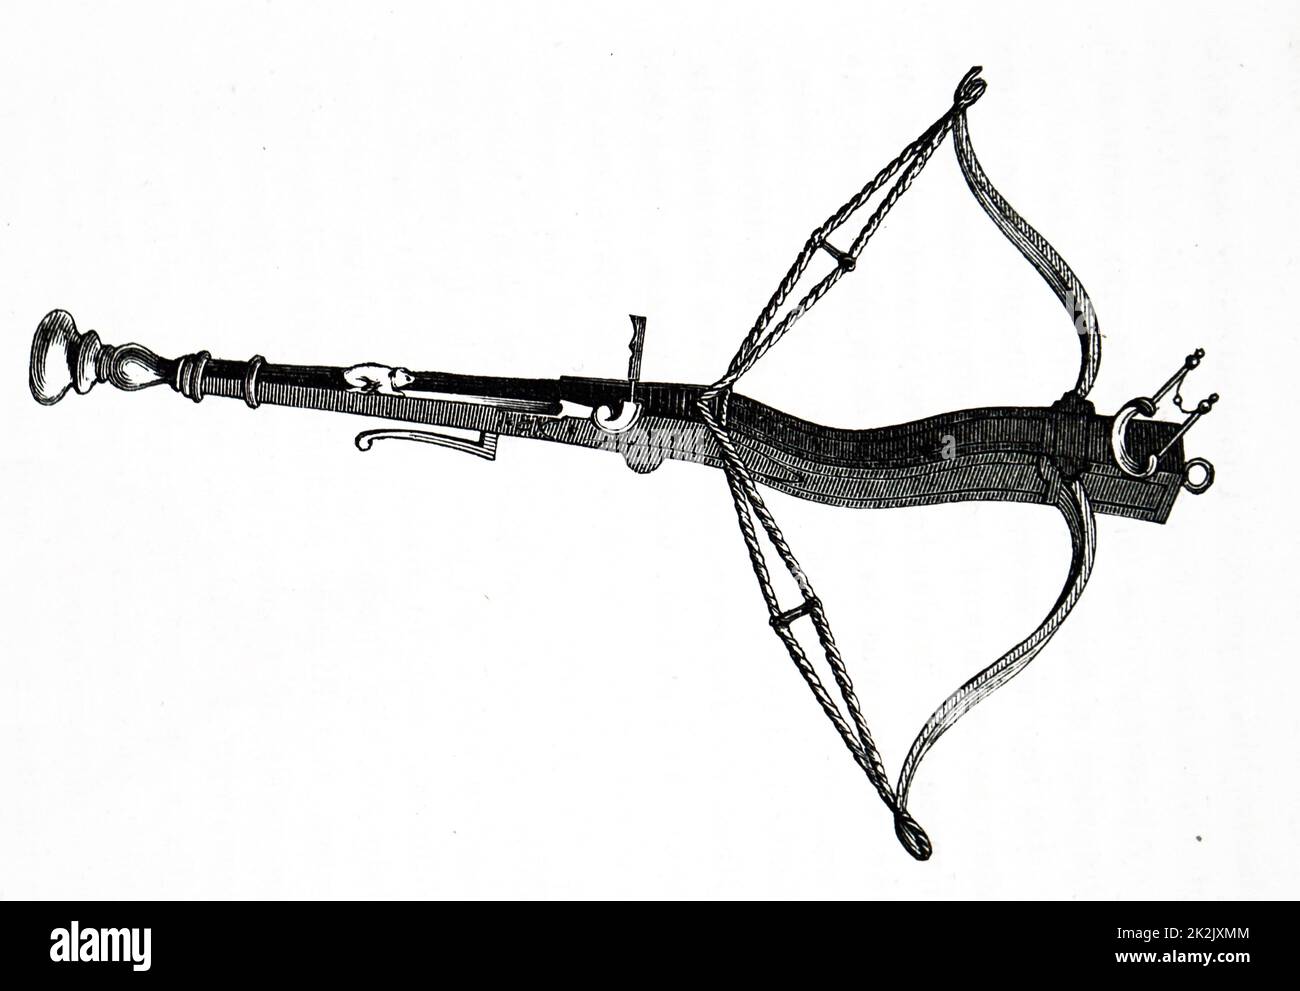 Engraving of an antique crossbow. Dated 18th Century Stock Photo